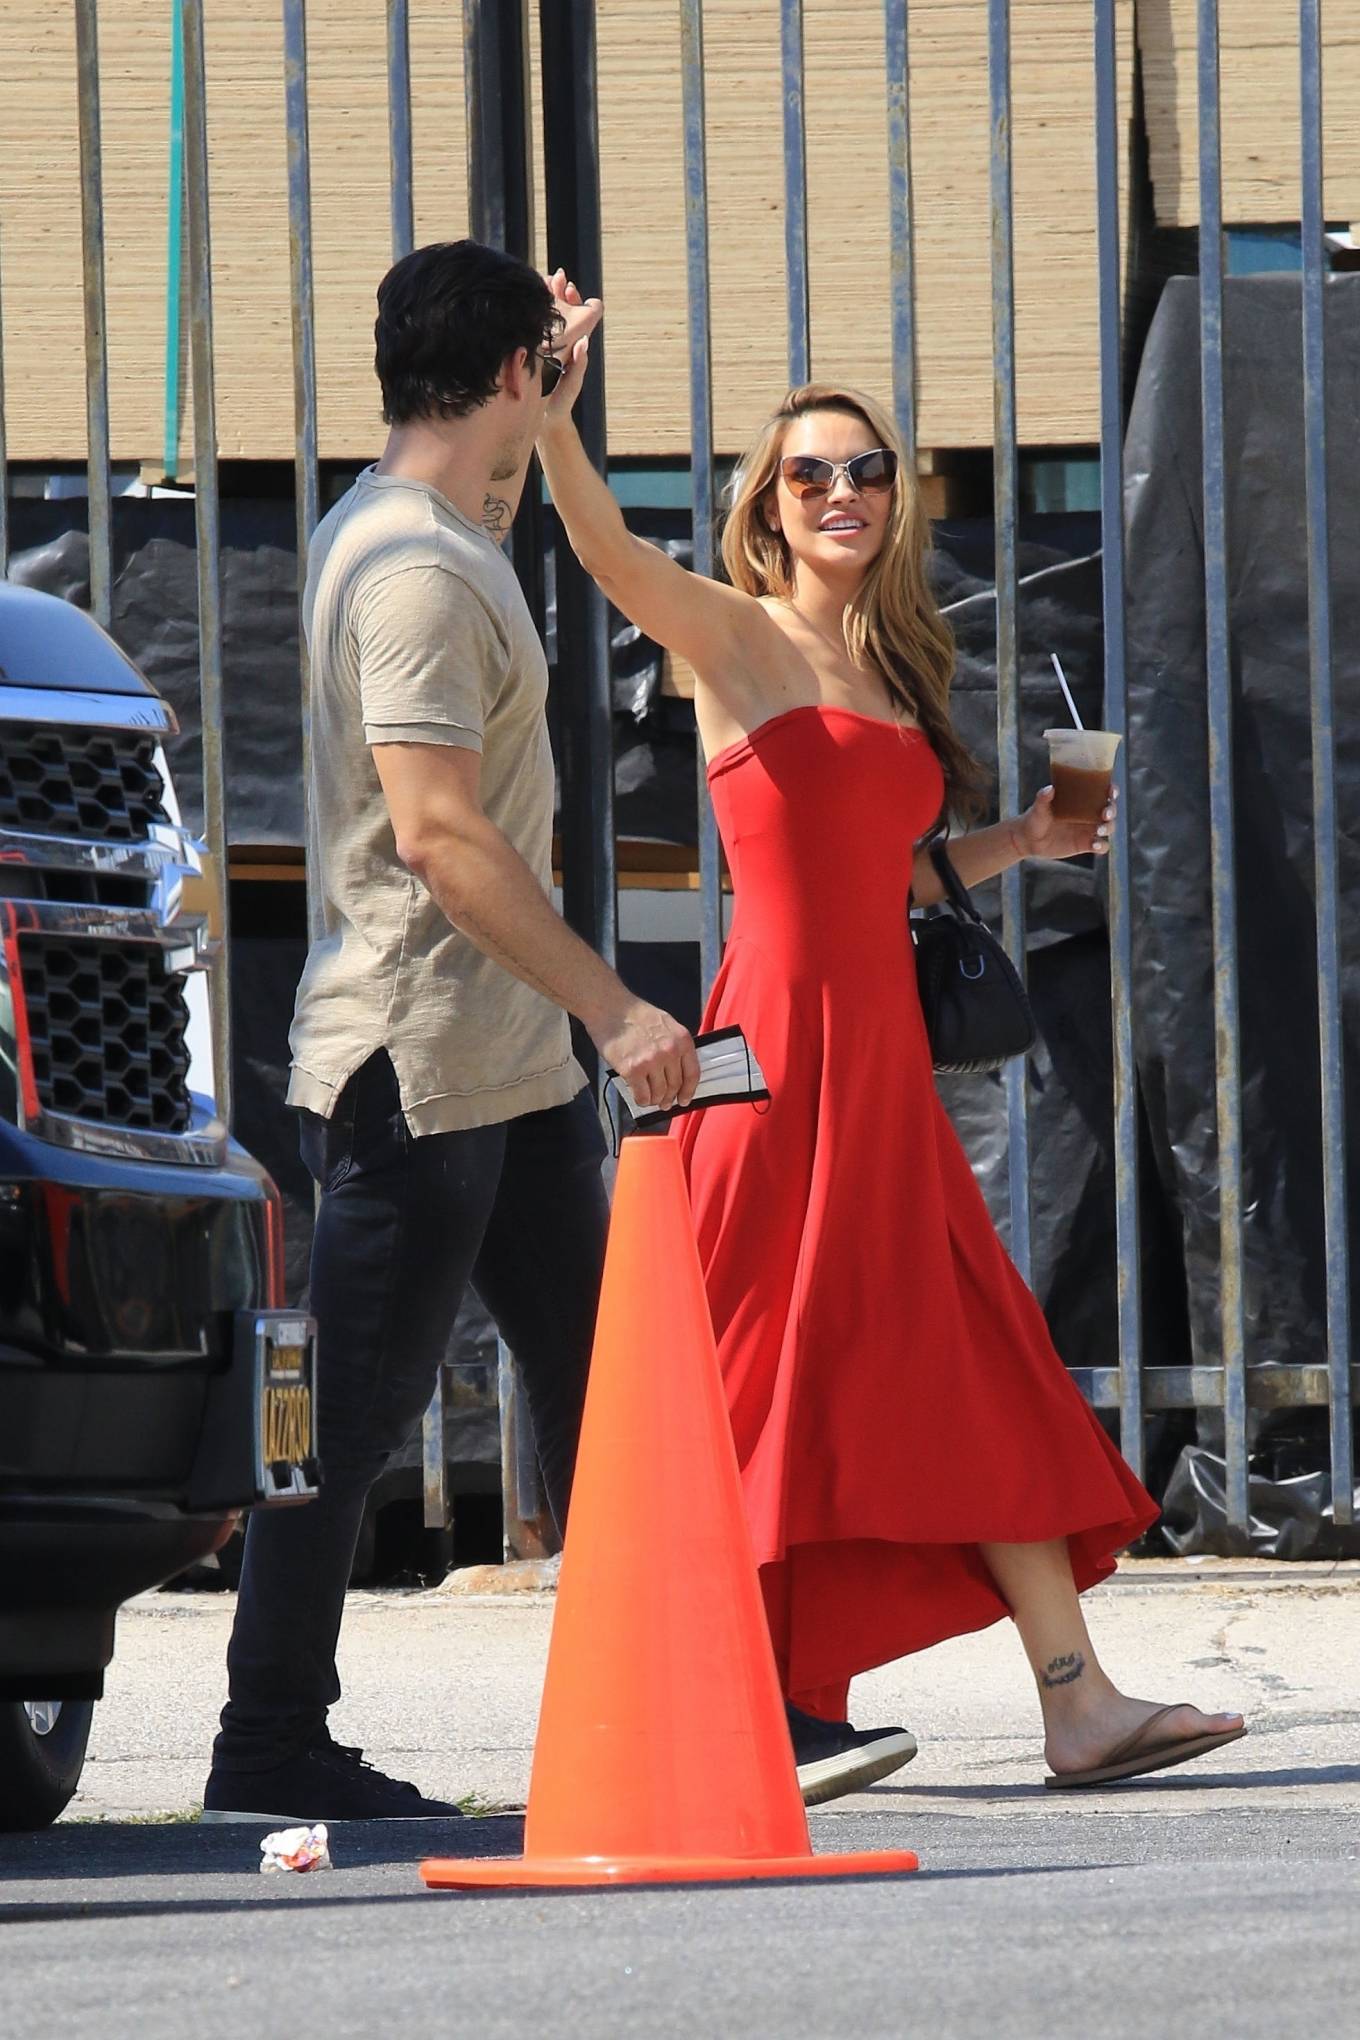 Chrishell Stause 2020 : Chrishell Stause – In a red dress at DWTS studio in Los Angeles-07